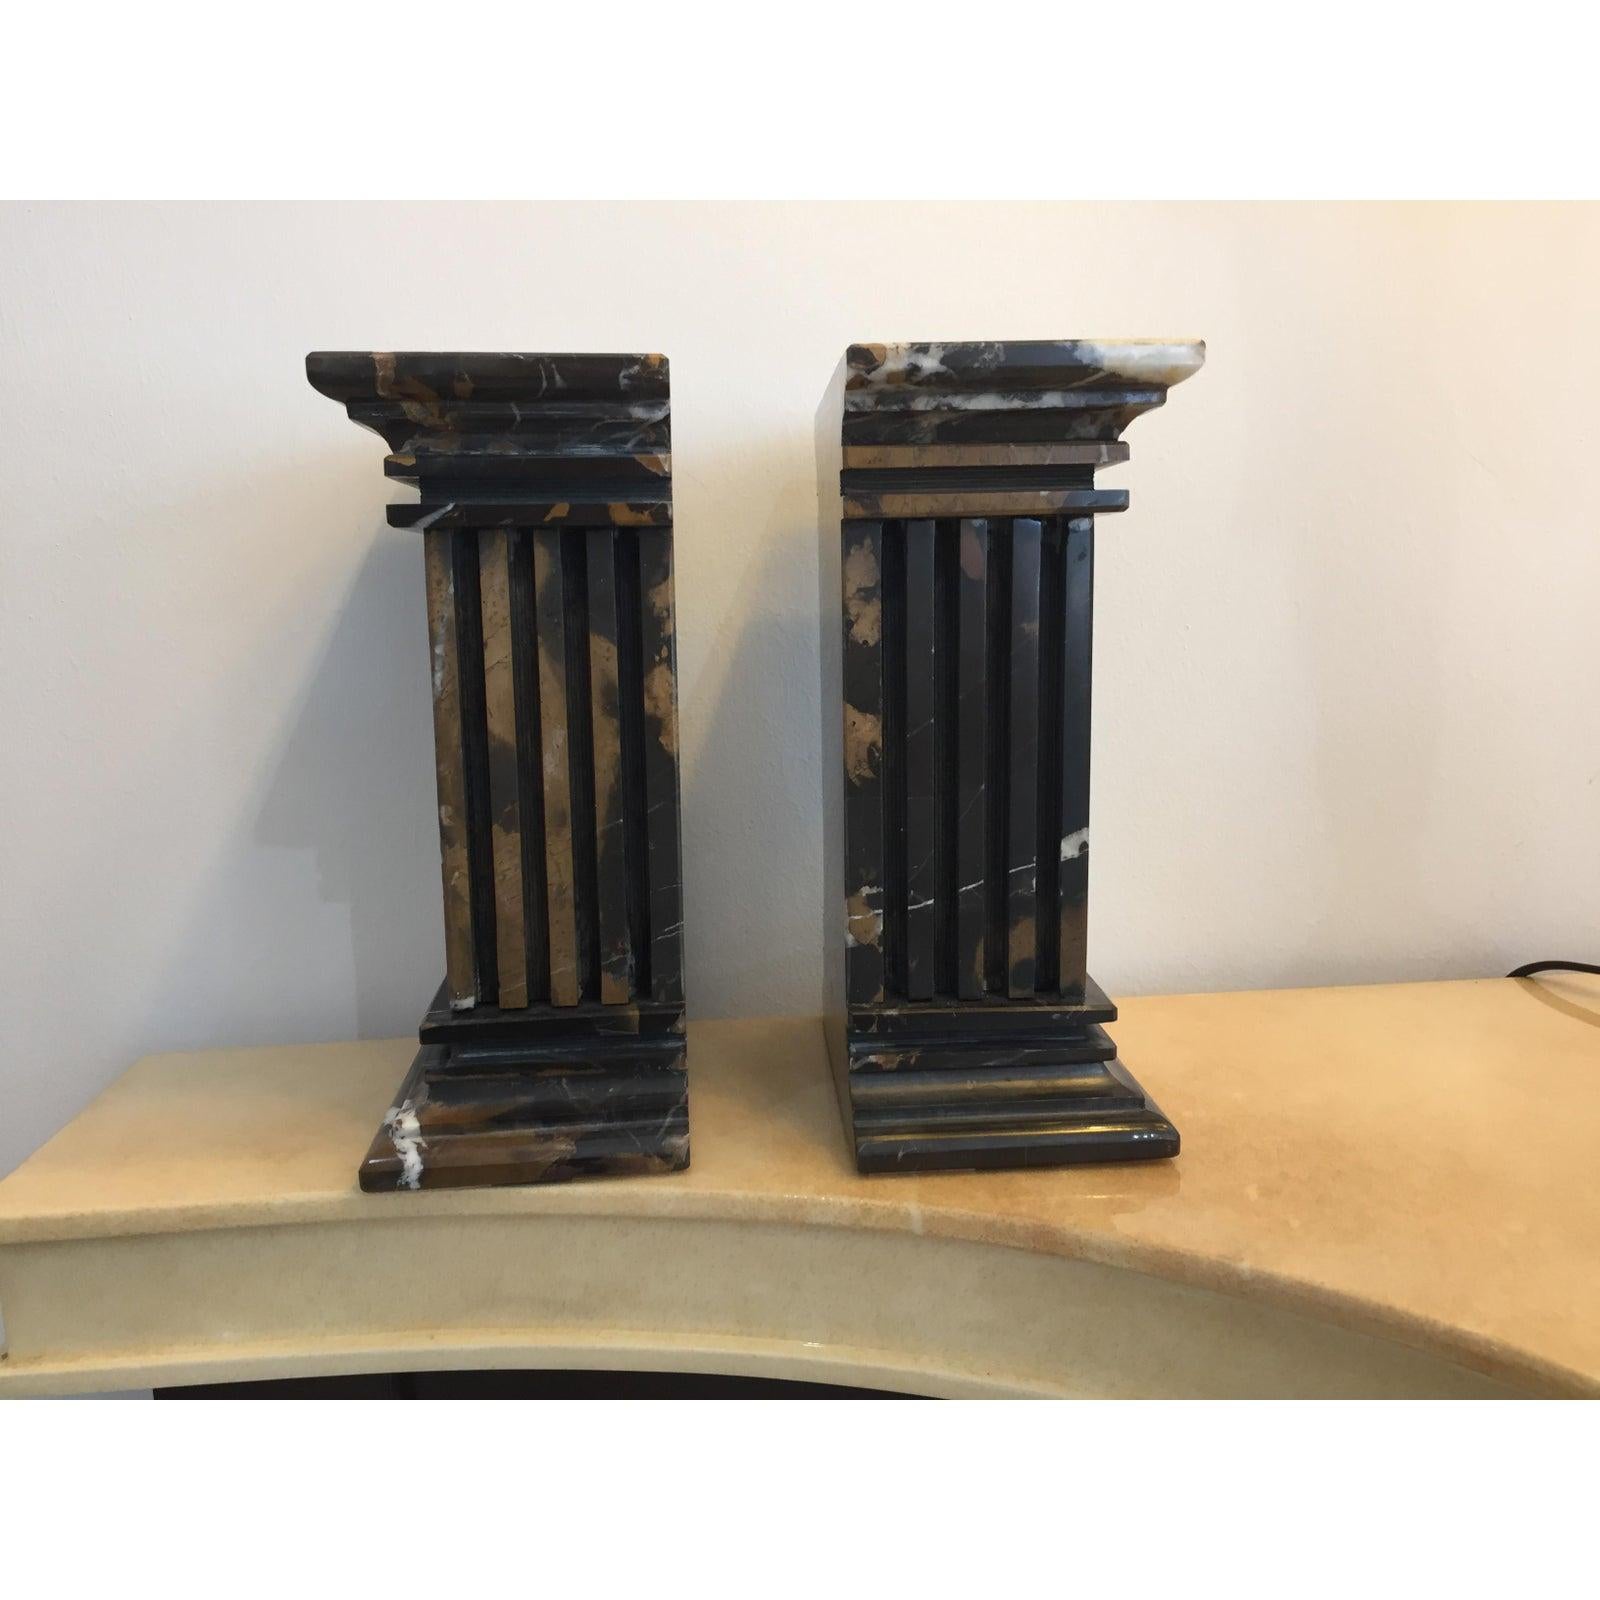 This stylish set of truncated coloum form marble bookends date to the 1930s.